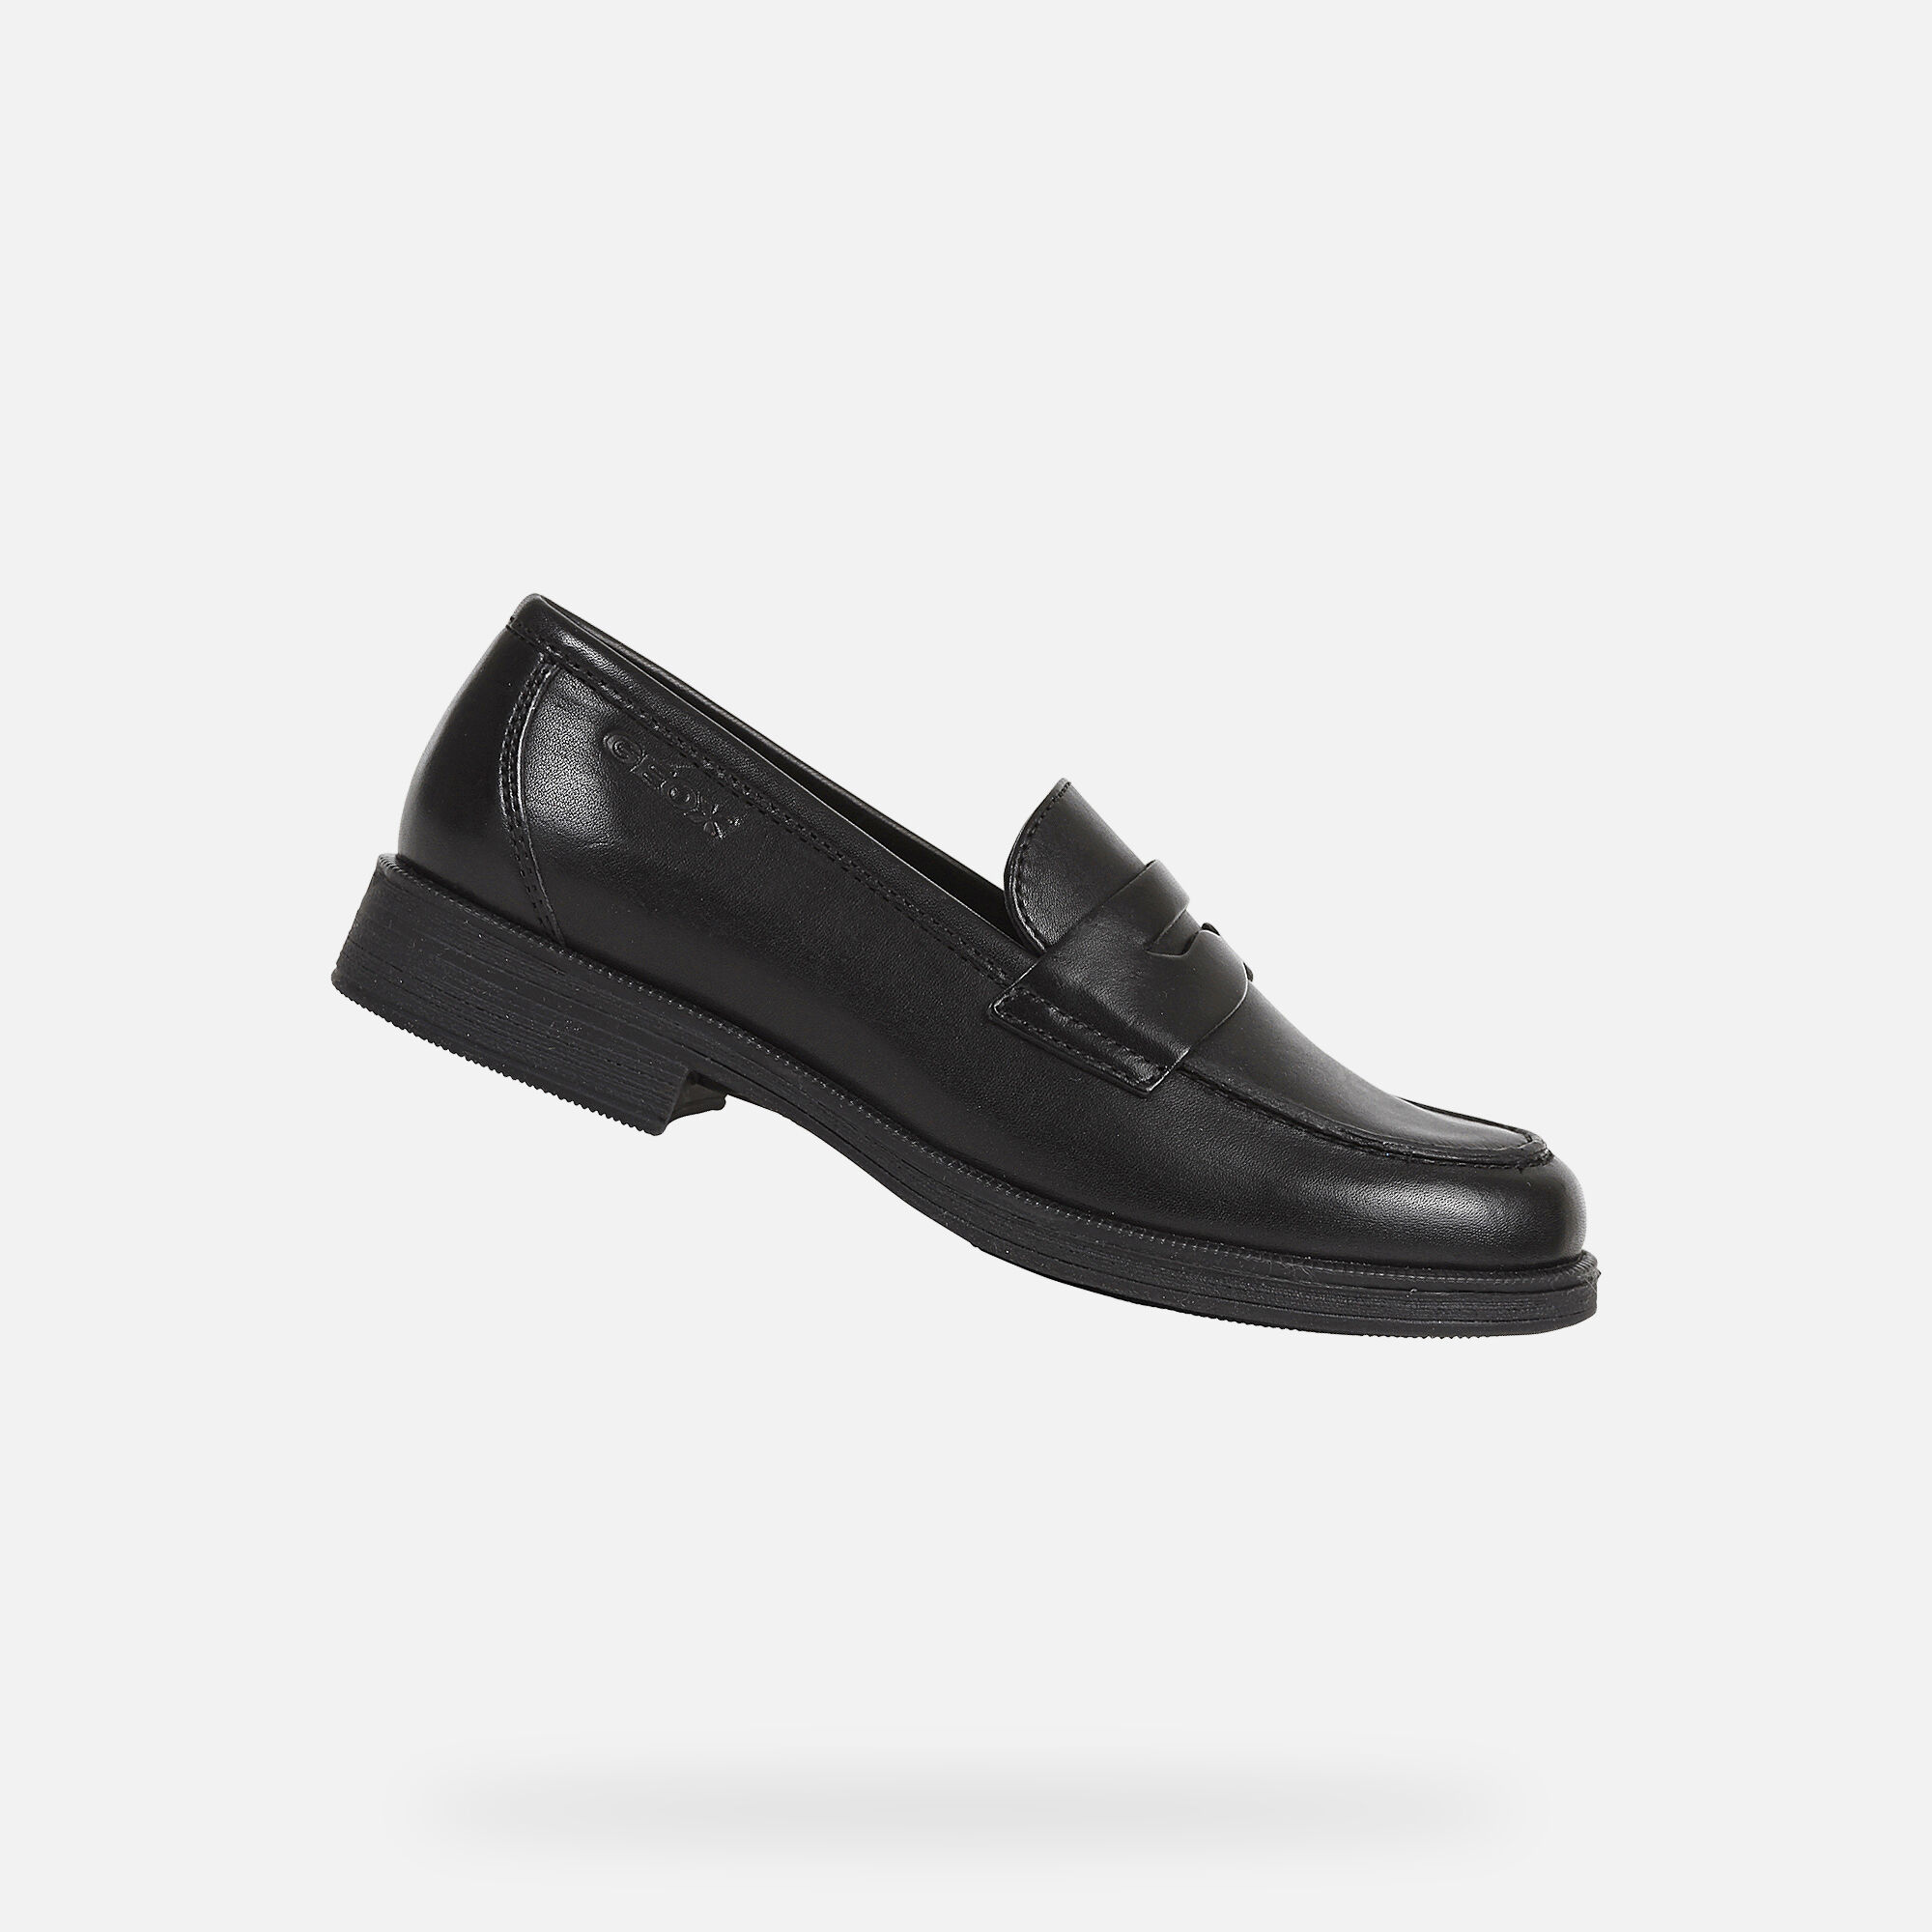 AGATA GIRL - UNIFORM SHOES from girls 